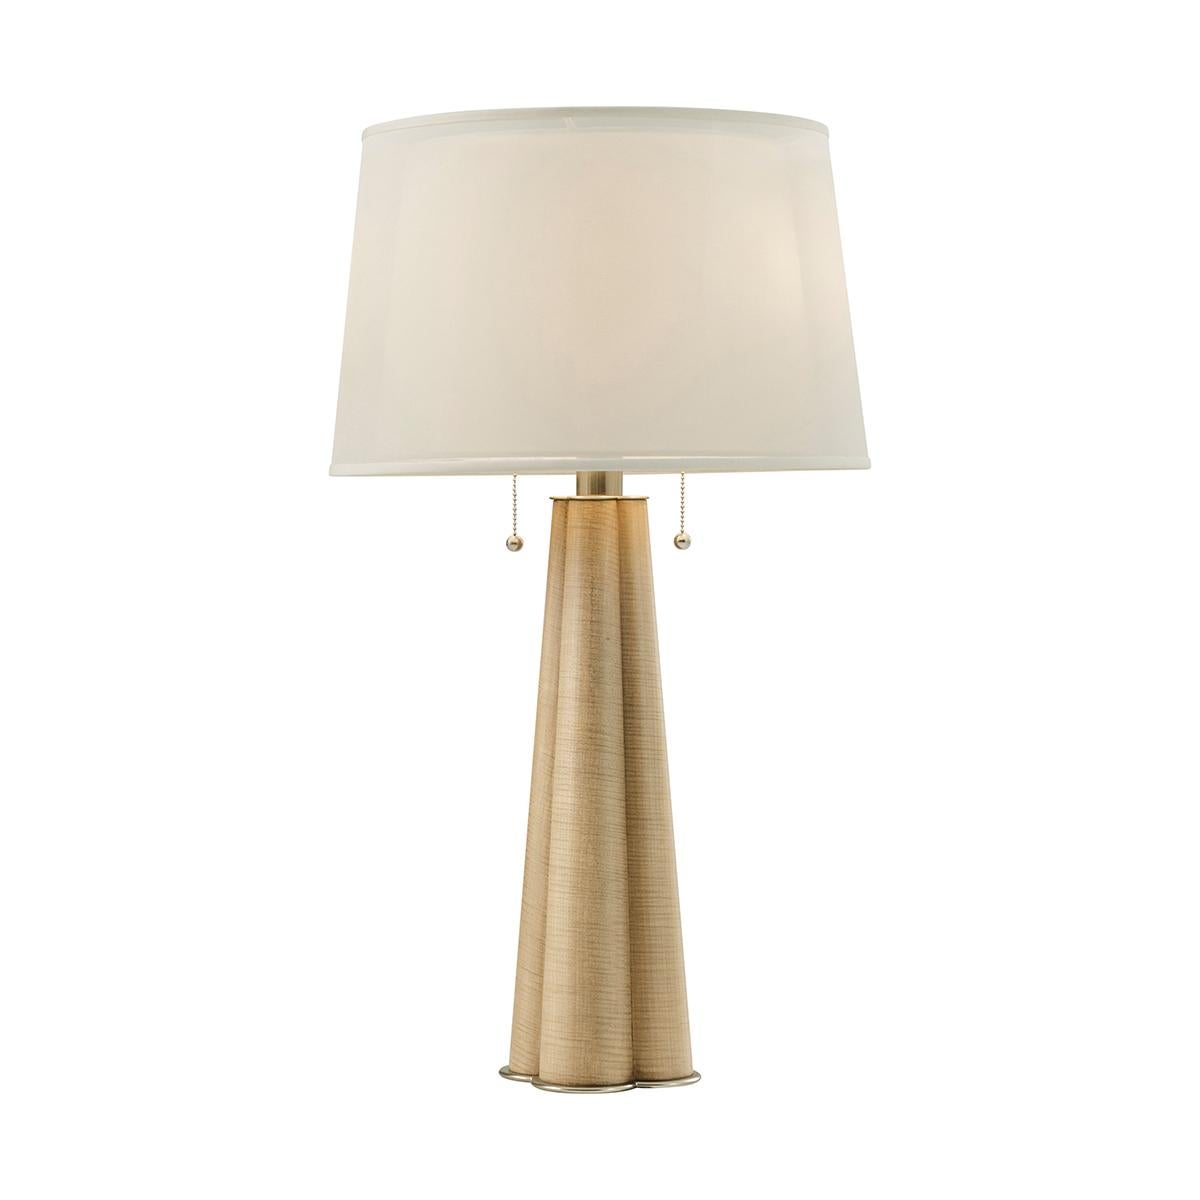 A beacon of 20th-century sophistication reimagined for the modern home. Inspired by the understated luxury of the 1920s, this lamp boasts a tapered cluster column form in a light sesame finish.

Whether it's enhancing a cozy corner or used next to